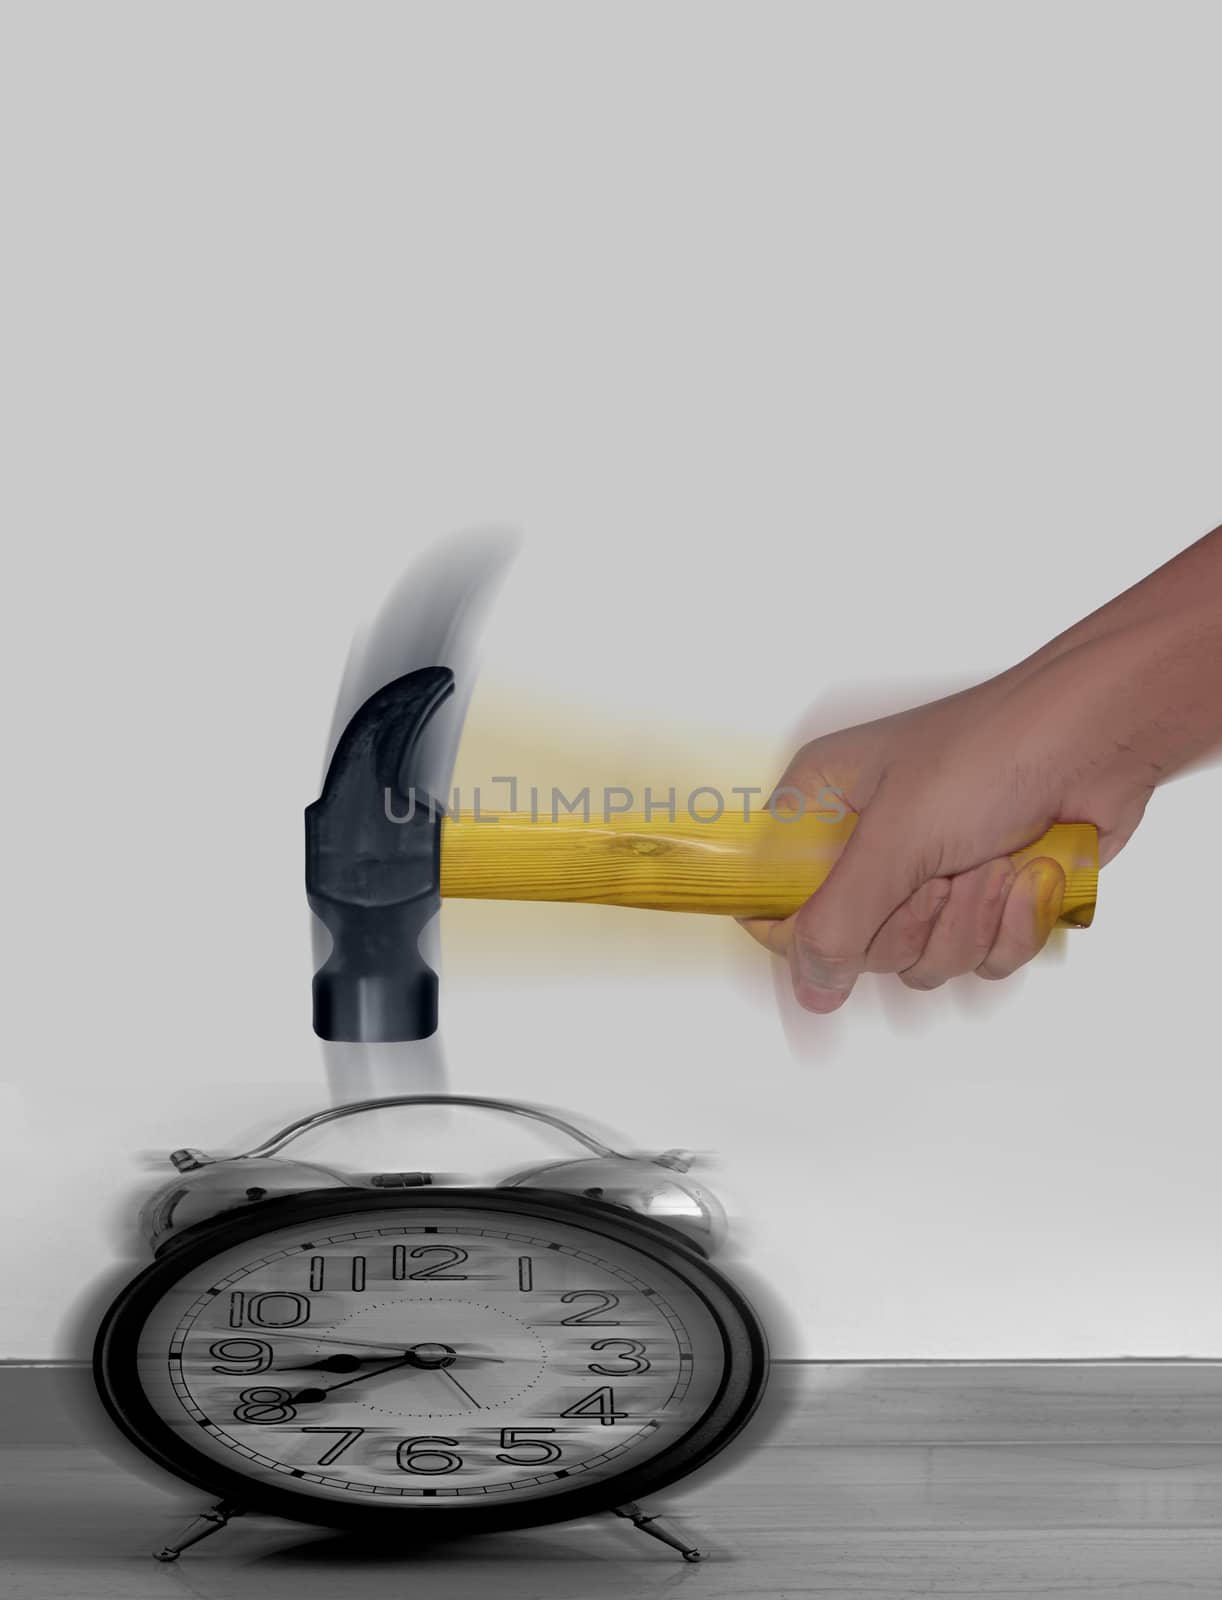 Hammer in Human Hand hitting Alarm Clock with motion blur